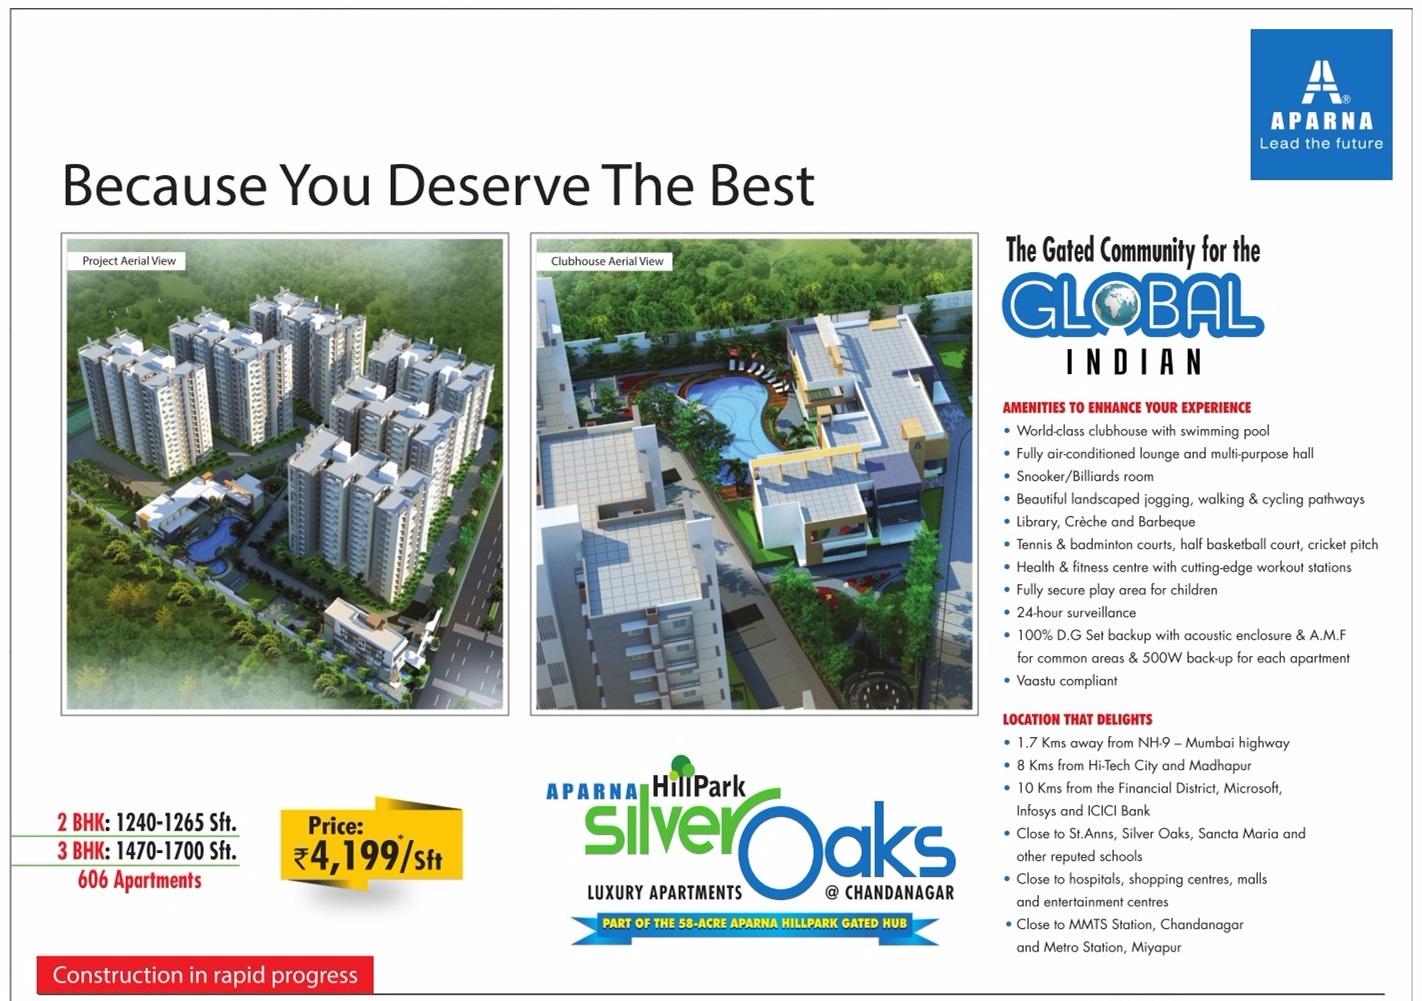 The gated community for global Indian at Aparna Silver Oaks in Hyderabad